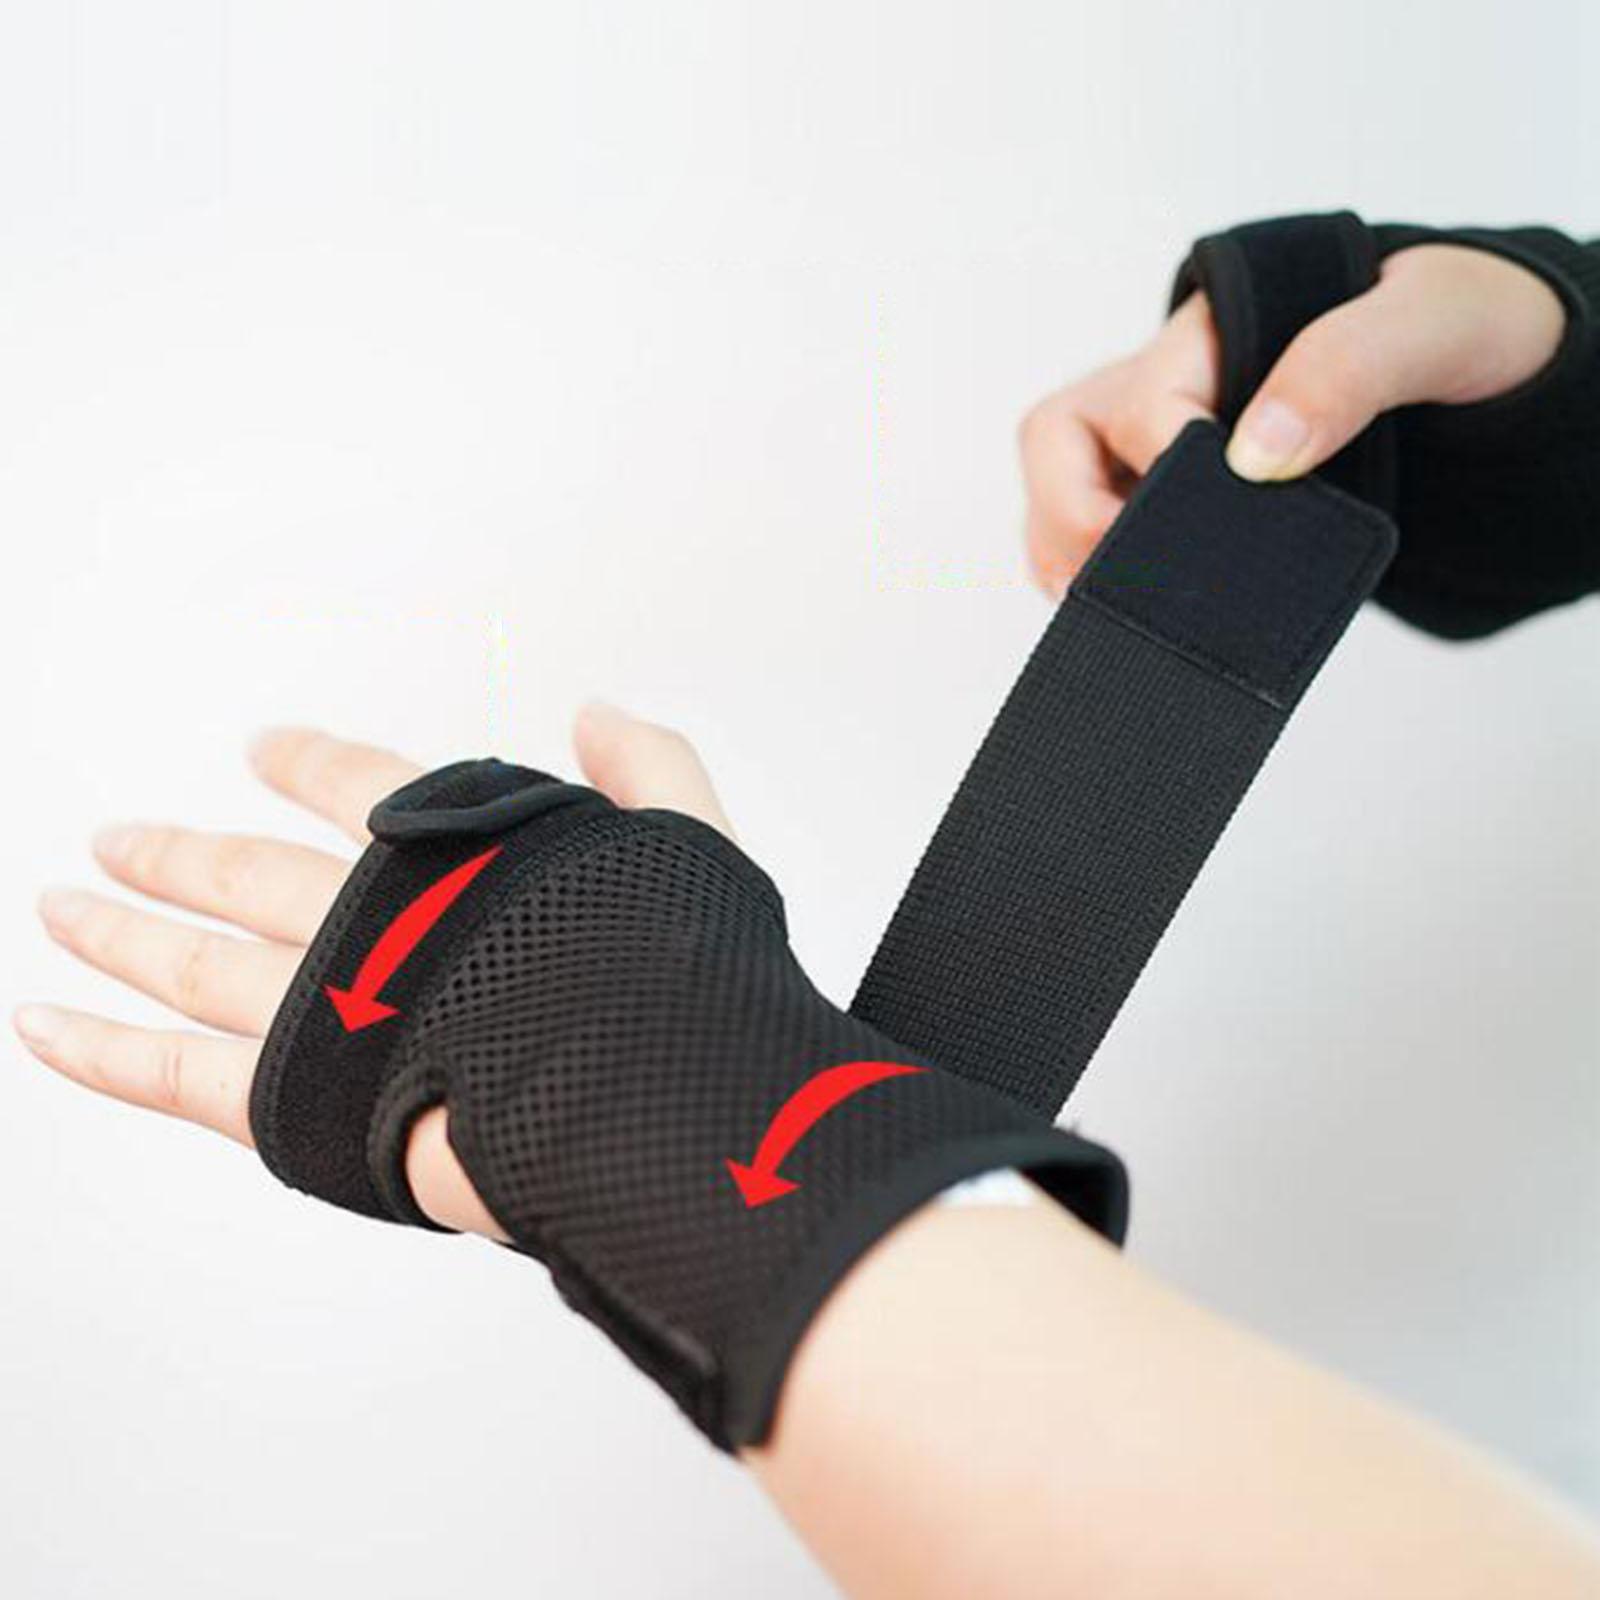 Wrist Support Injury Recovery Brace for Sport Injuries Training L Left hand